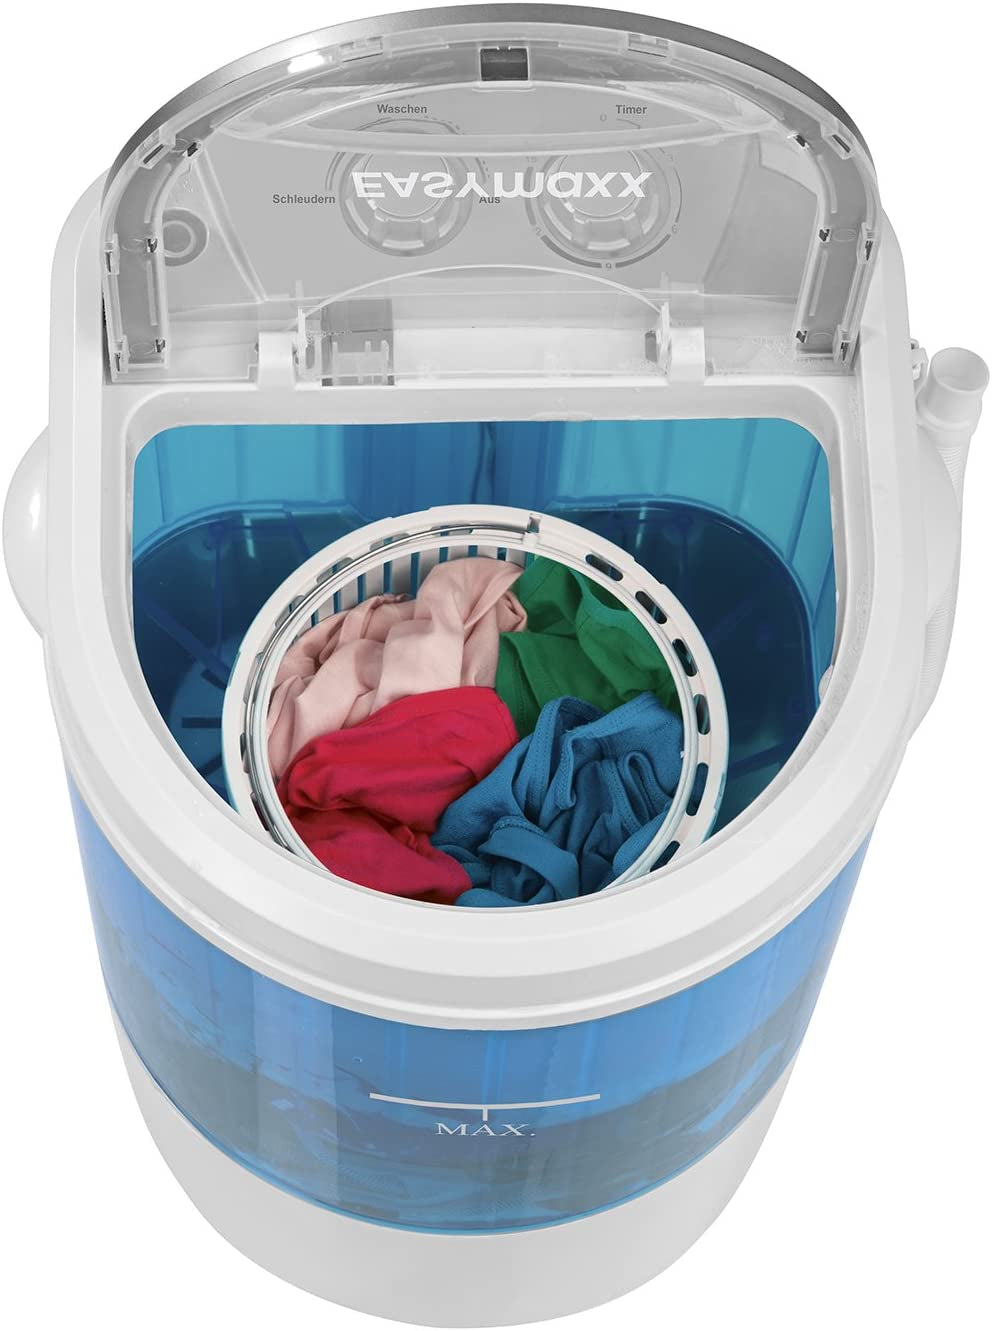 Mini-Washing Machine, Camping Washing Machine Also for Single Households 260W with Centrifugal Function. Improved Version Model Year 2017 (10 Litres)